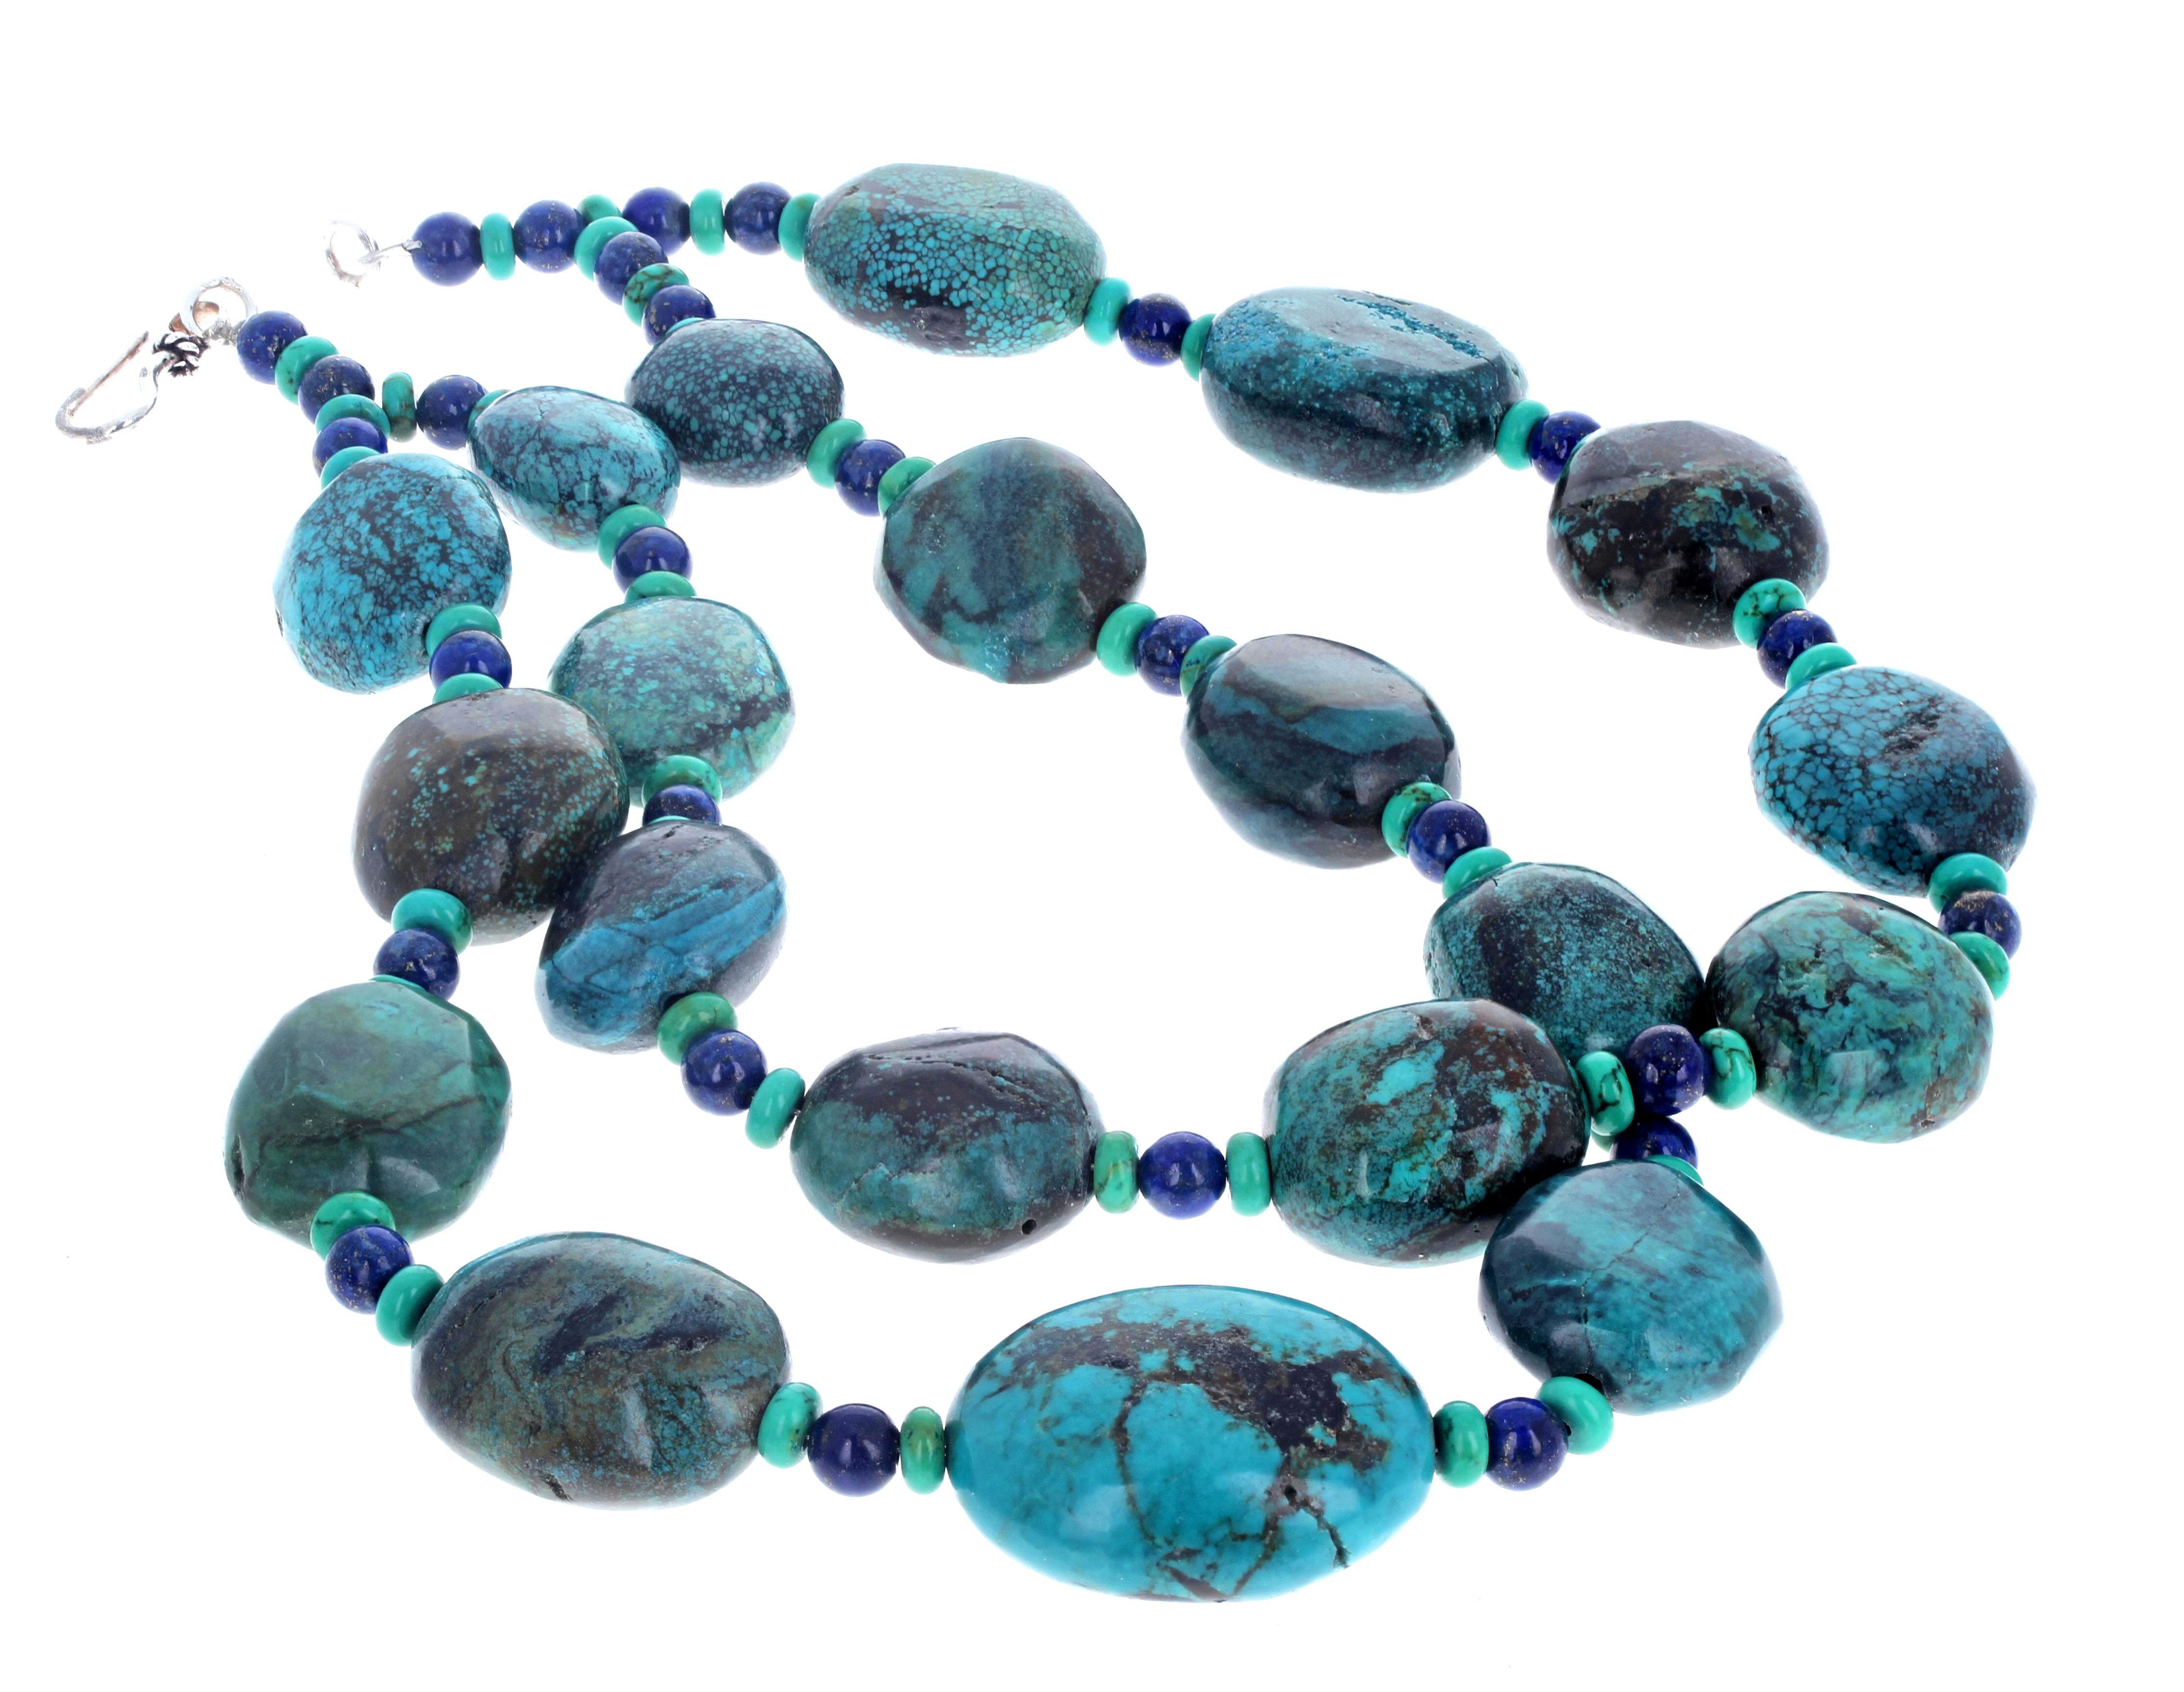 This necklace is absolutely fascinatingly beautiful.  It is natural highly polished real Turquoise enhanced with little highly polished little round blue lapis lazuli color rondels and measures 17 1/2 inches long.  The largest of the Turquoise is